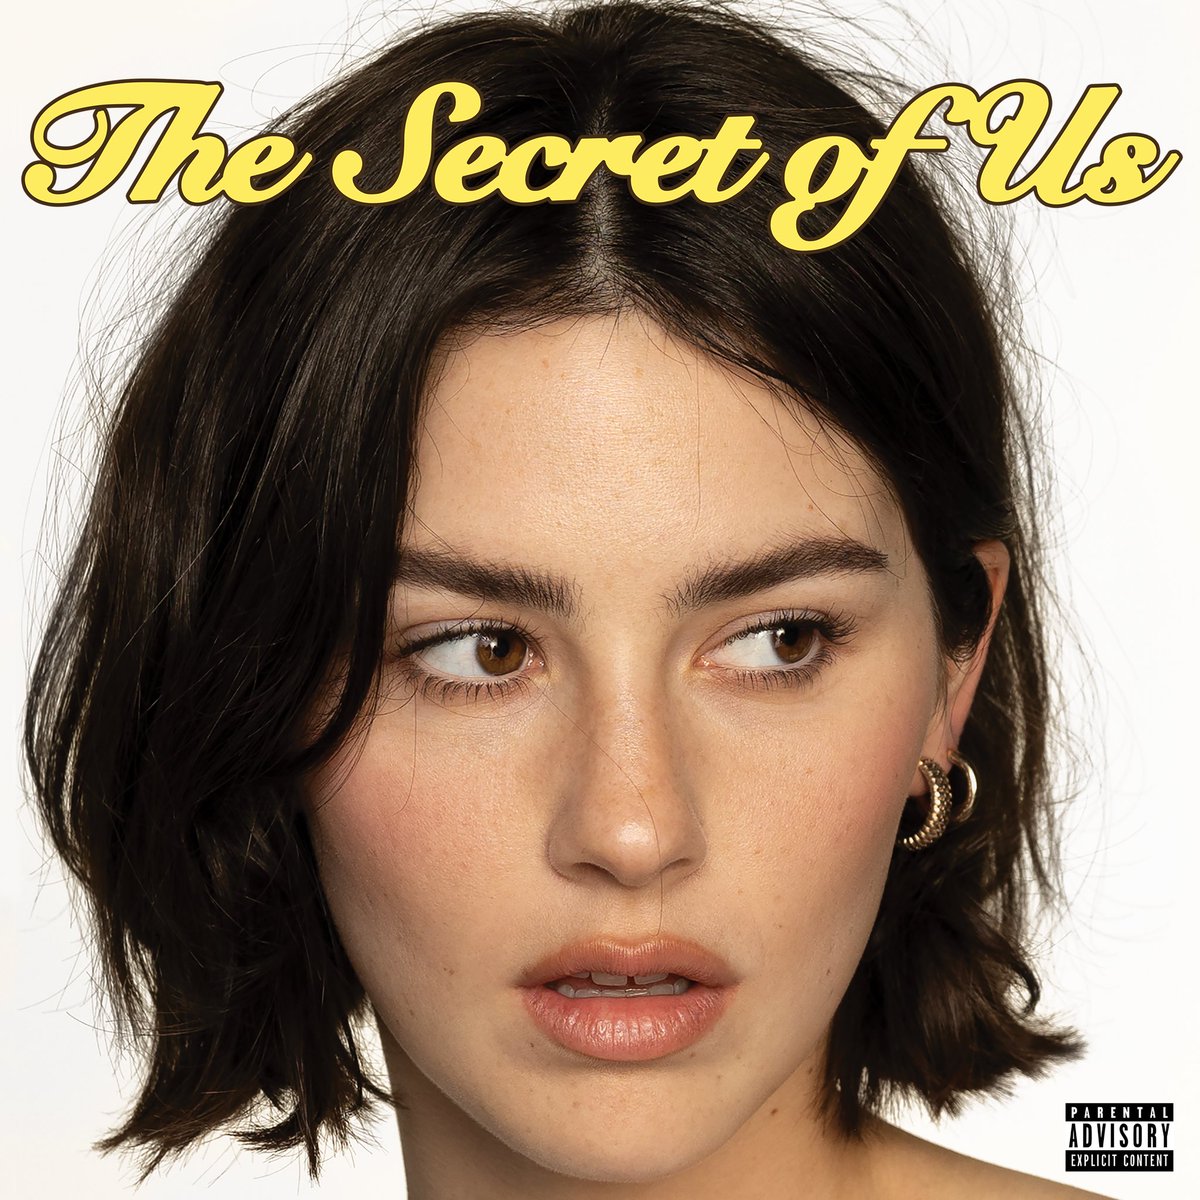 The secret is out 💛 Gracie’s album, The Secret of Us, is out June 21st 💛 the first single, Risk, is yours on May 1st at 9am PT 💛

GracieAbrams.lnk.to/Risk